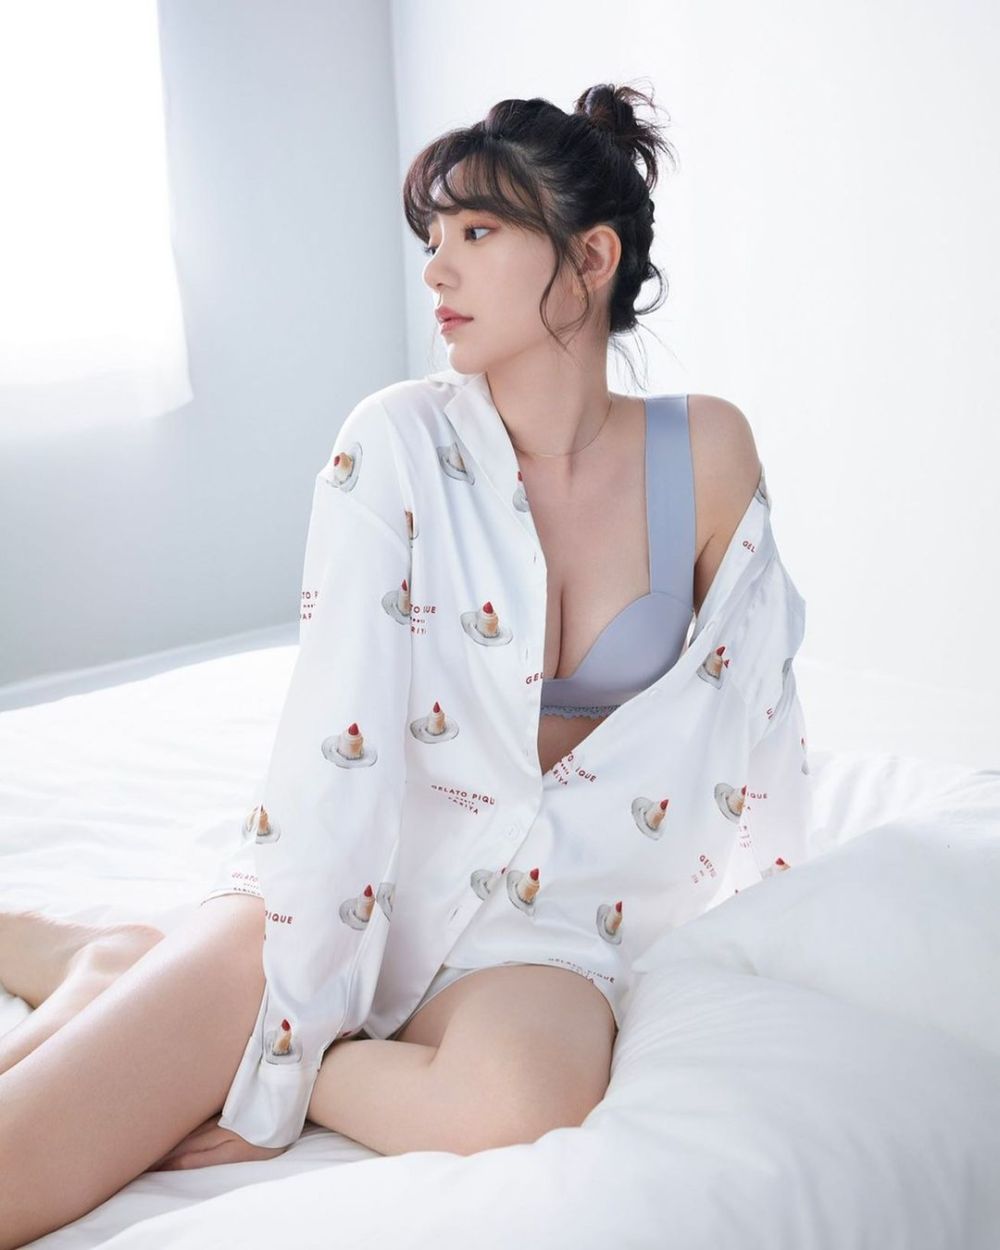 Hsueh-Fu Kuo Sexy and Hottest Photos , Latest Pics